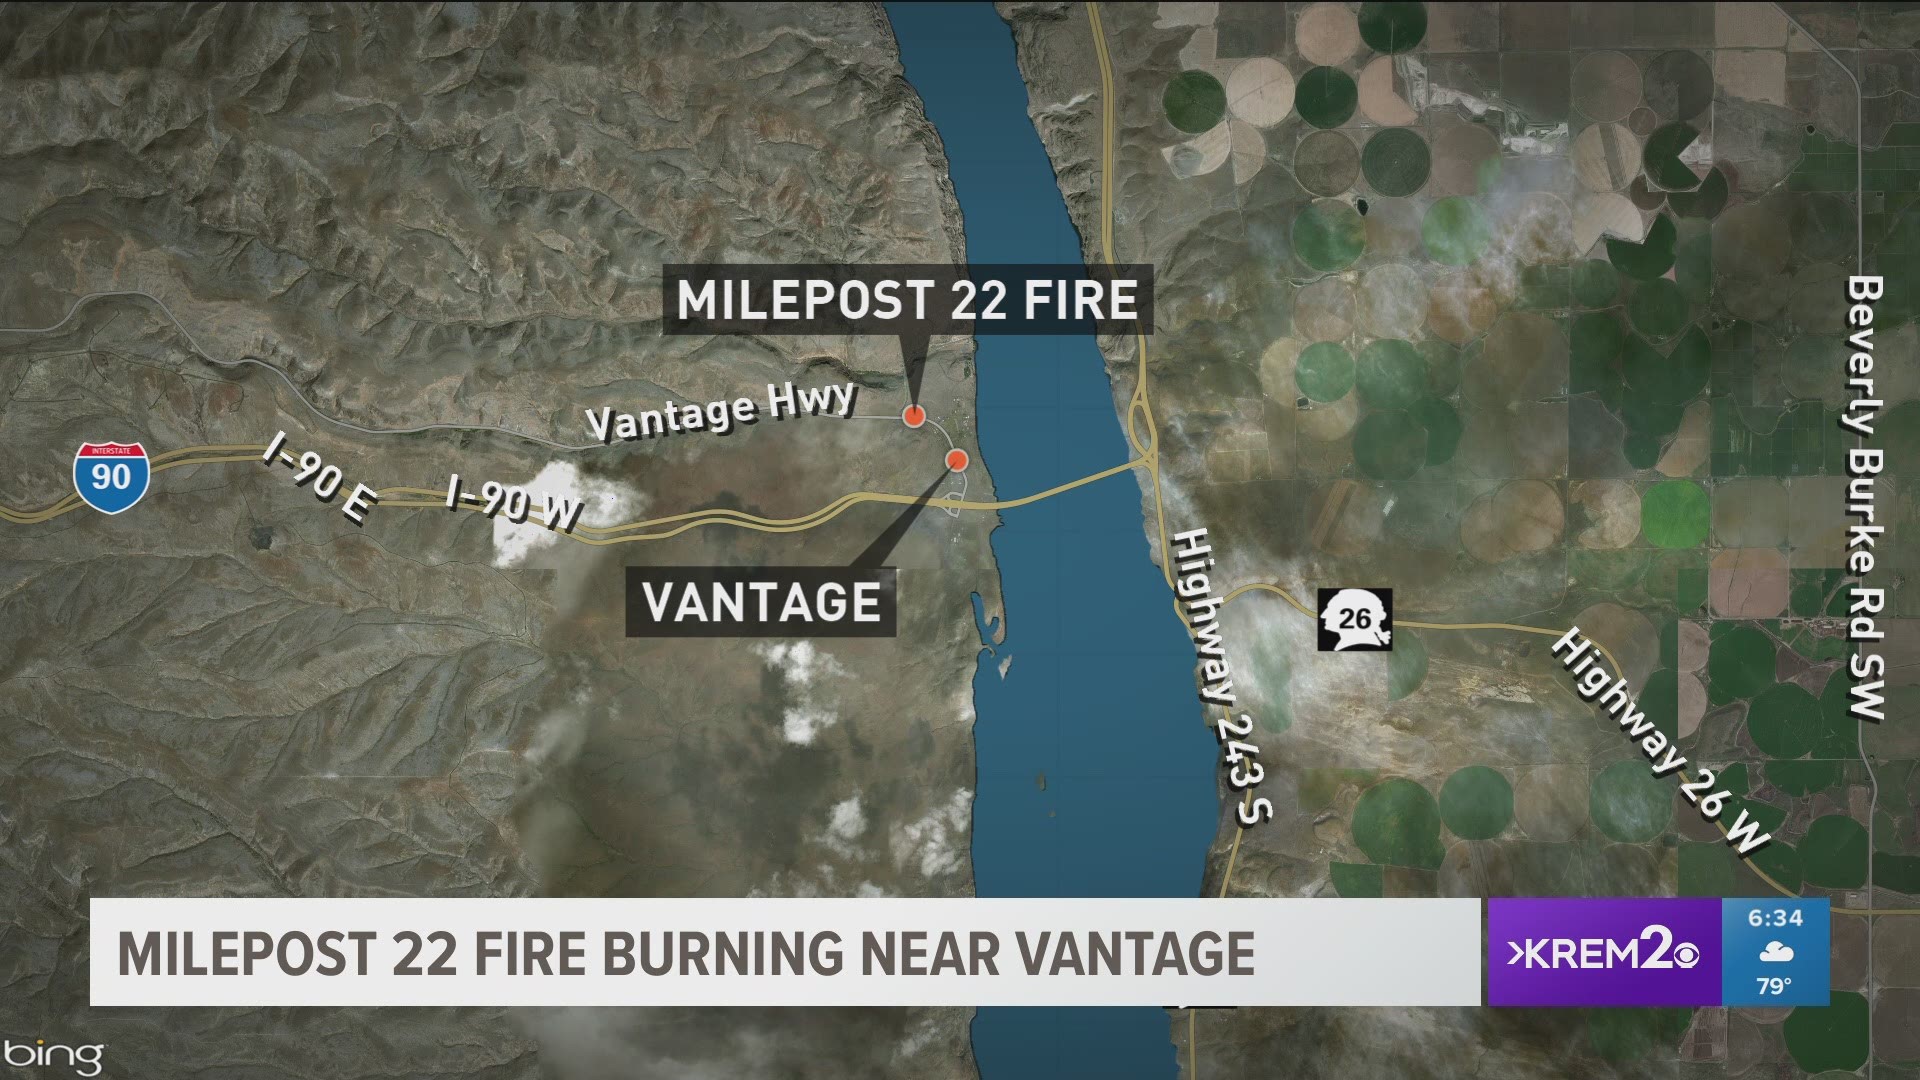 The Milepost 22 Fire was nearly 90 percent contained as of Friday evening.